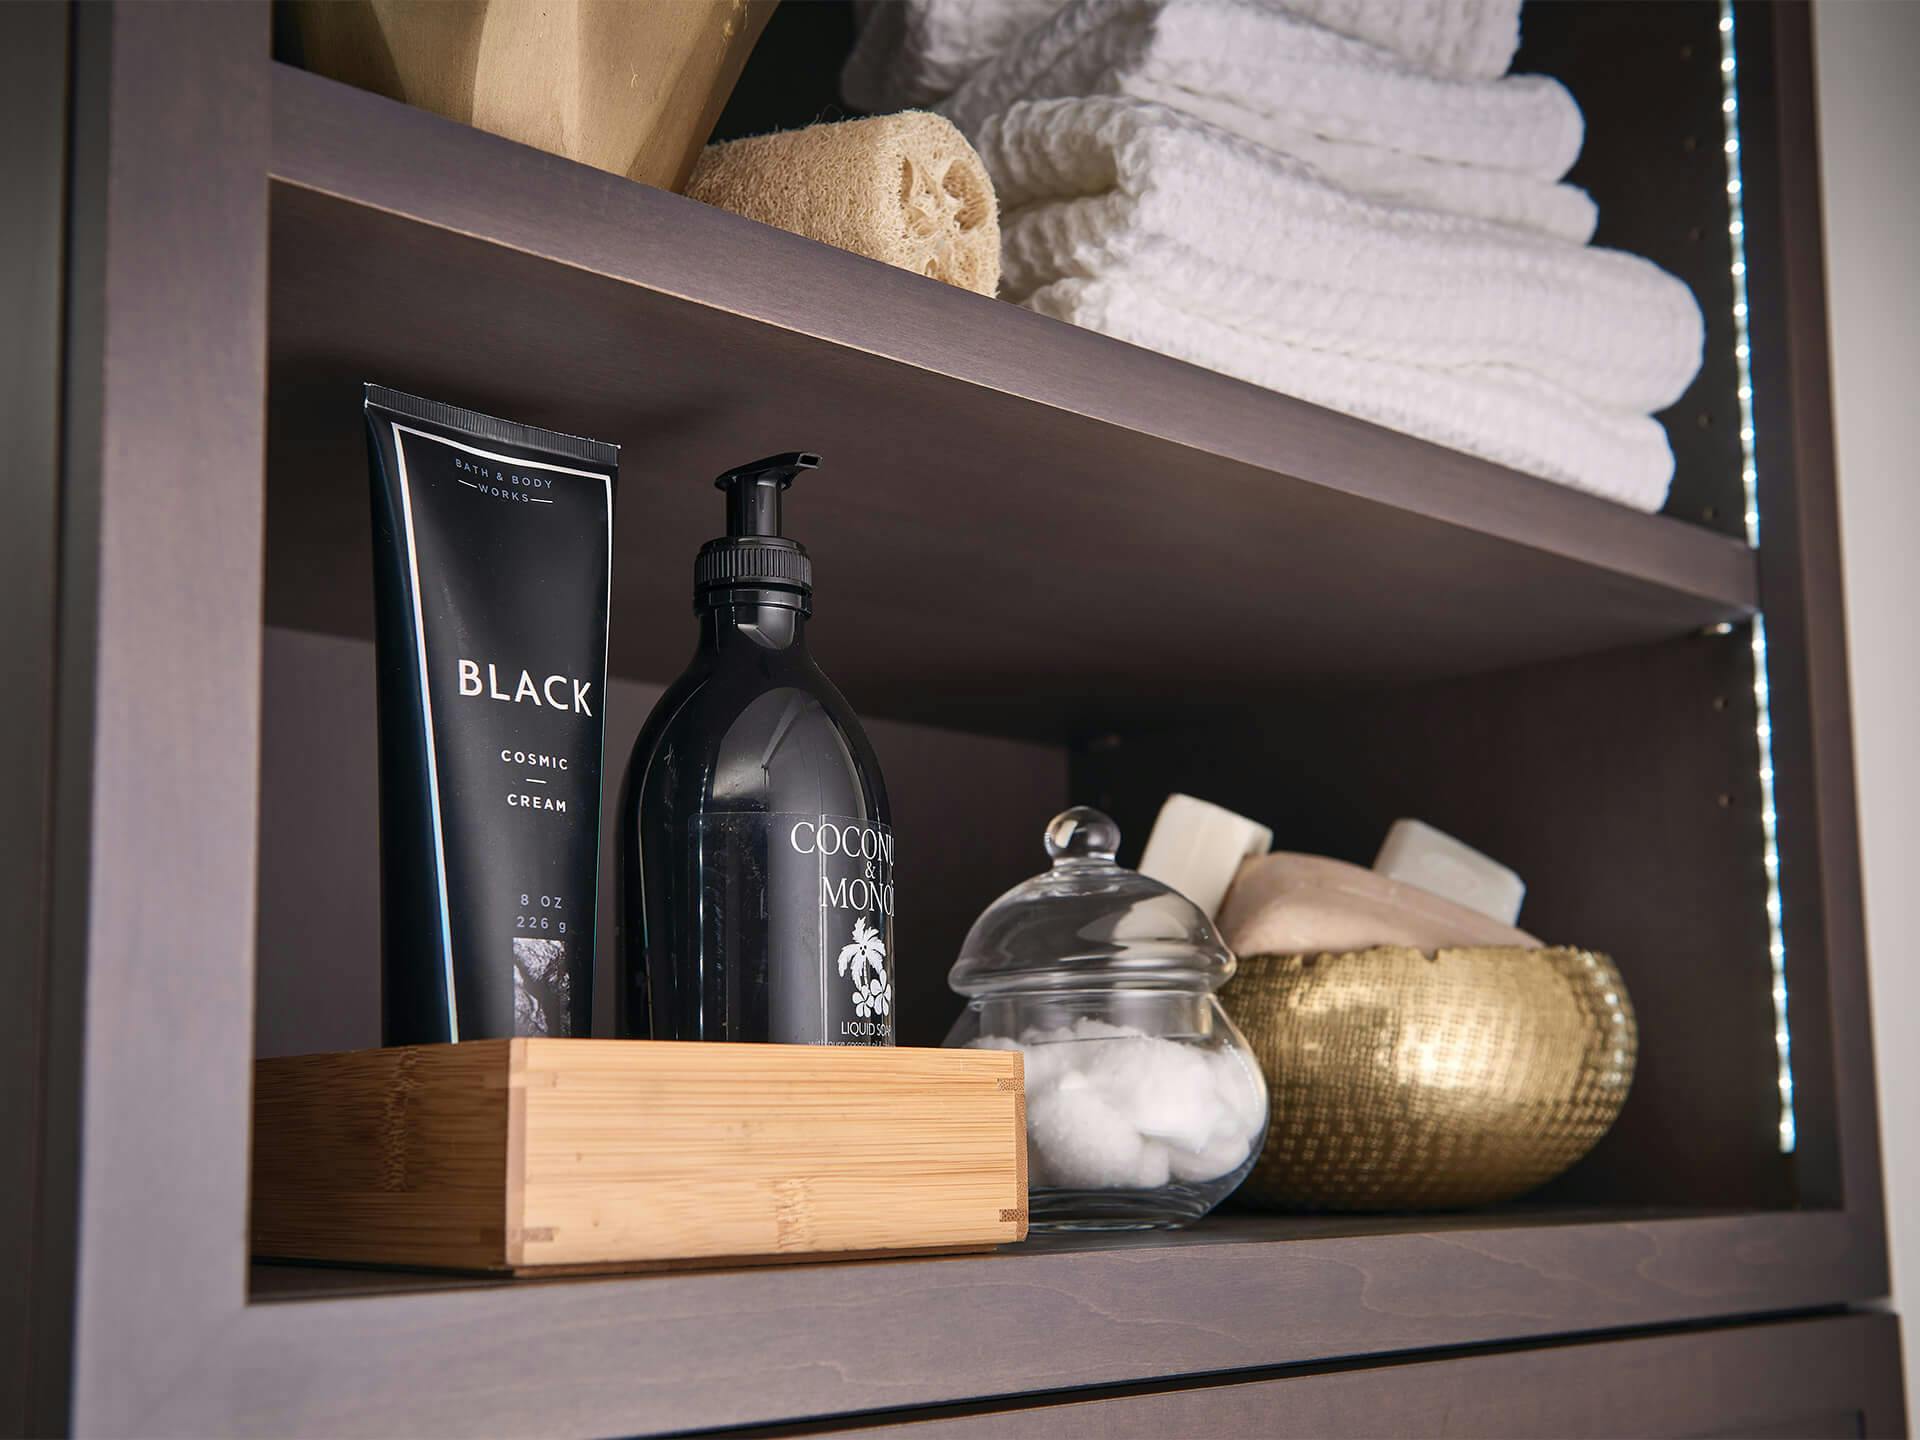 Lifestyle image of a shelf stocked with personal care items 